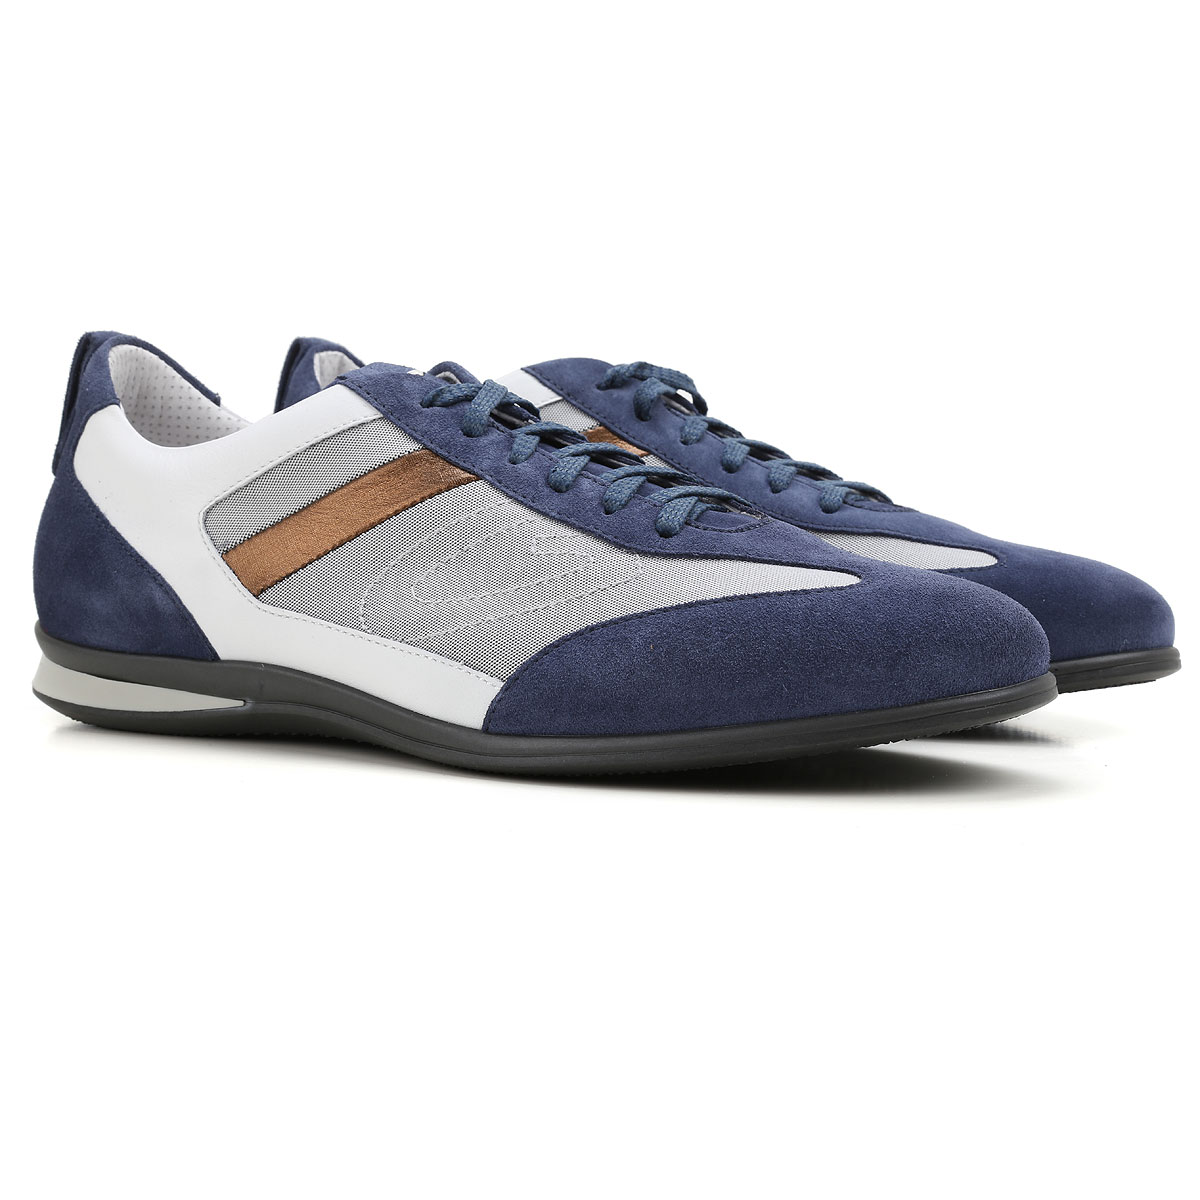 Mens Shoes Alberto Guardiani, Style code: 72433-sx7480-